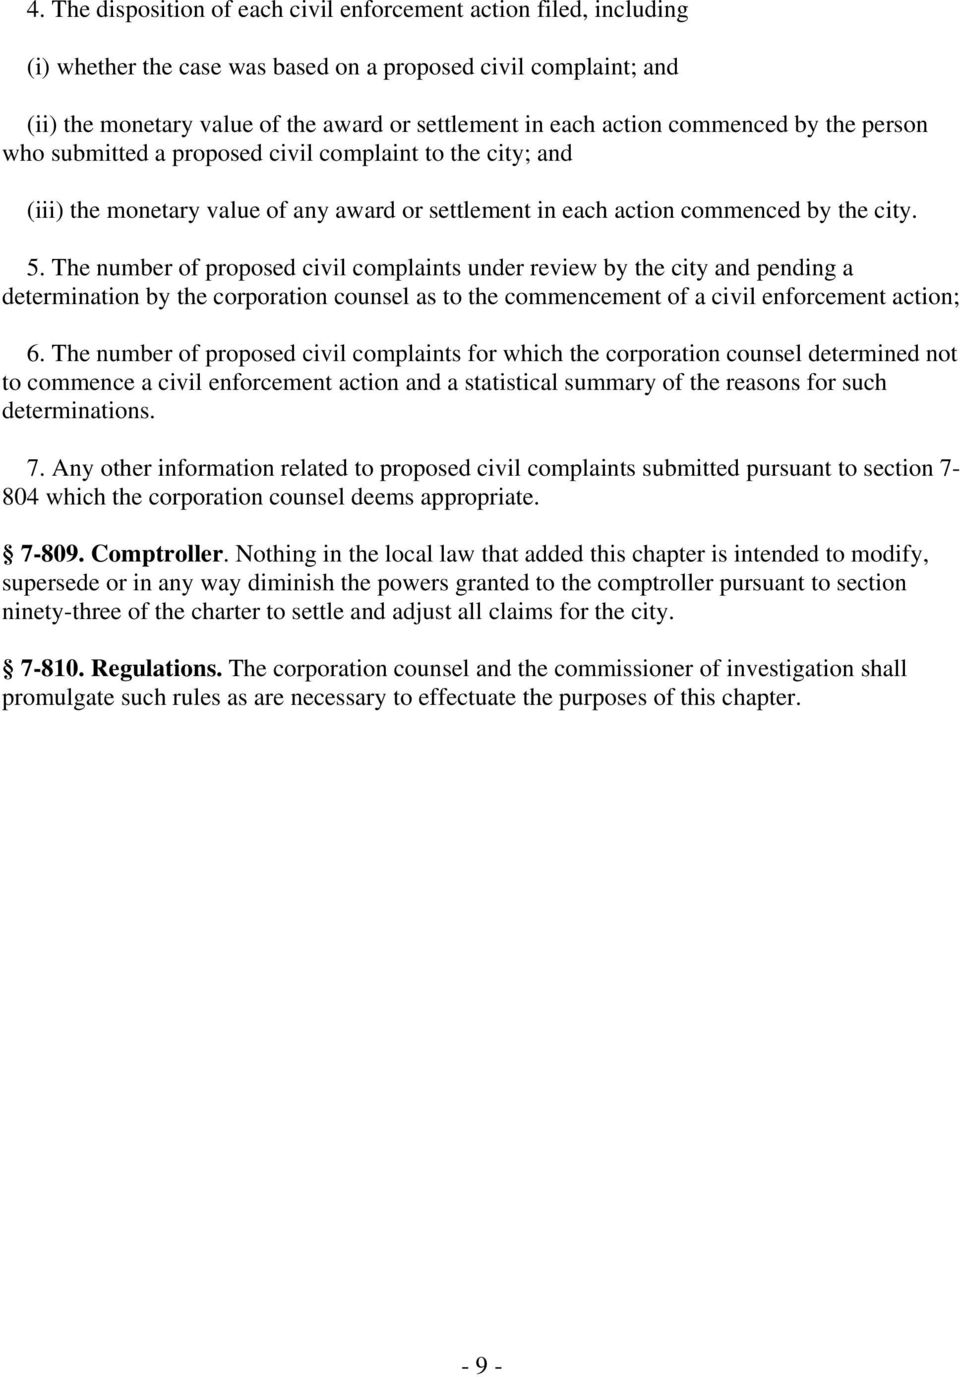 The number of proposed civil complaints under review by the city and pending a determination by the corporation counsel as to the commencement of a civil enforcement action; 6.